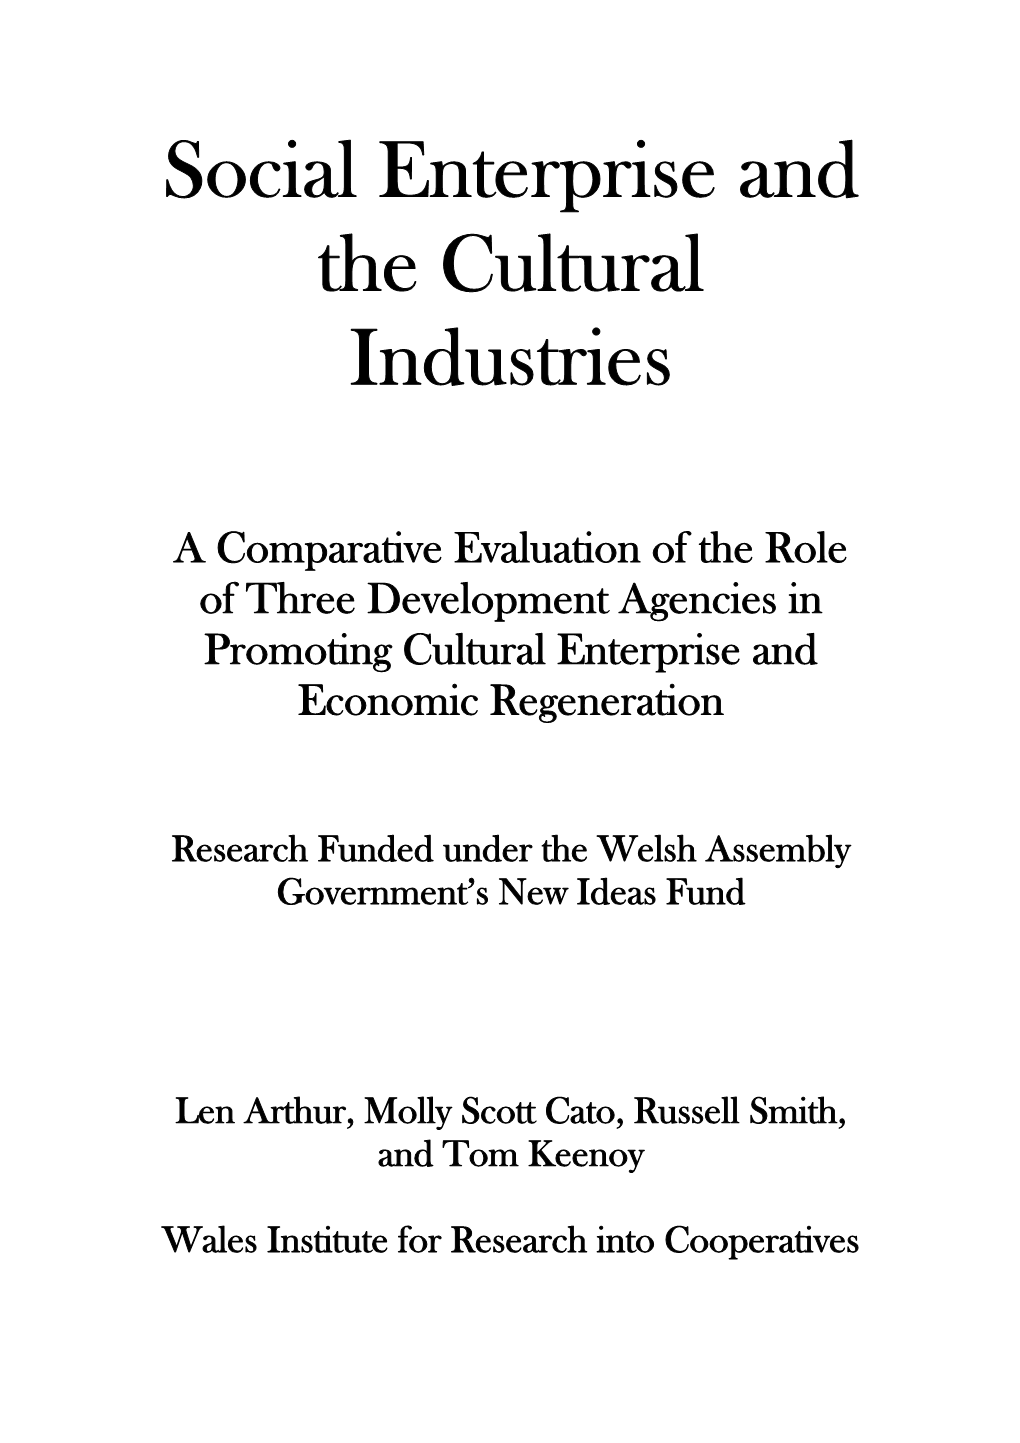 Social Enterprise and the Cultural Industries